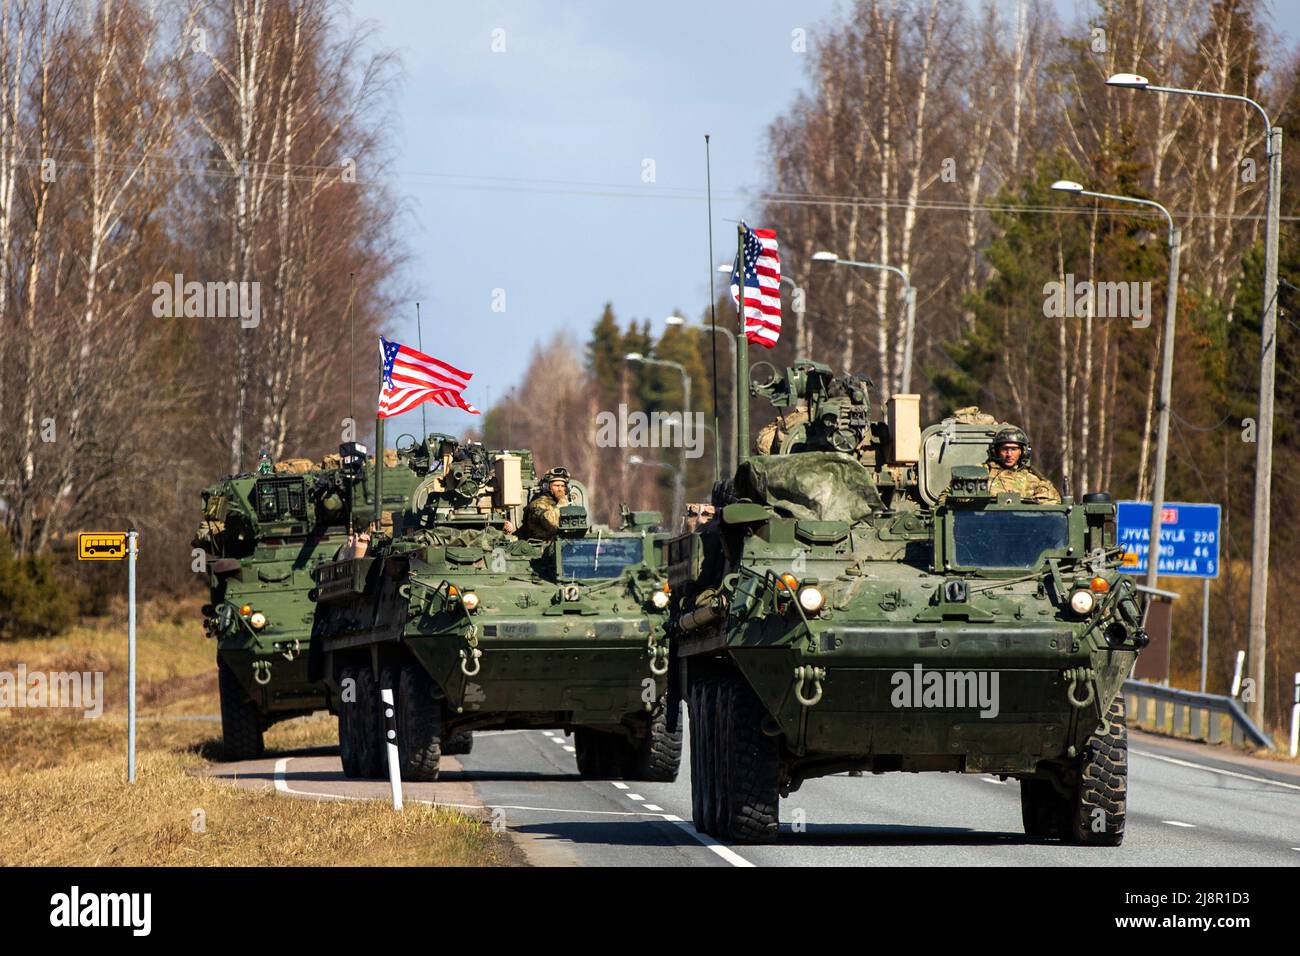 May 8, 2022 - Finland - U.S. Army Capt. Denis Majewski, Outlaw Troop Commander assigned to 4th Squadron, 2d Cavalry Regiment, leads his convoy in a tactical road march from Niinisalo Training Area, Finland, May 8, 2022. Exercise Arrow is an annual, pre-planned, multinational exercise taking place in Finland, where visiting forces to include the U.S., U.K., Latvia, and Estonia, train together with the Finnish Defense Forces in high intensity force-on-force engagements and a live fire exercise with the purpose of increasing military readiness and developing interoperability among participating p Stock Photo